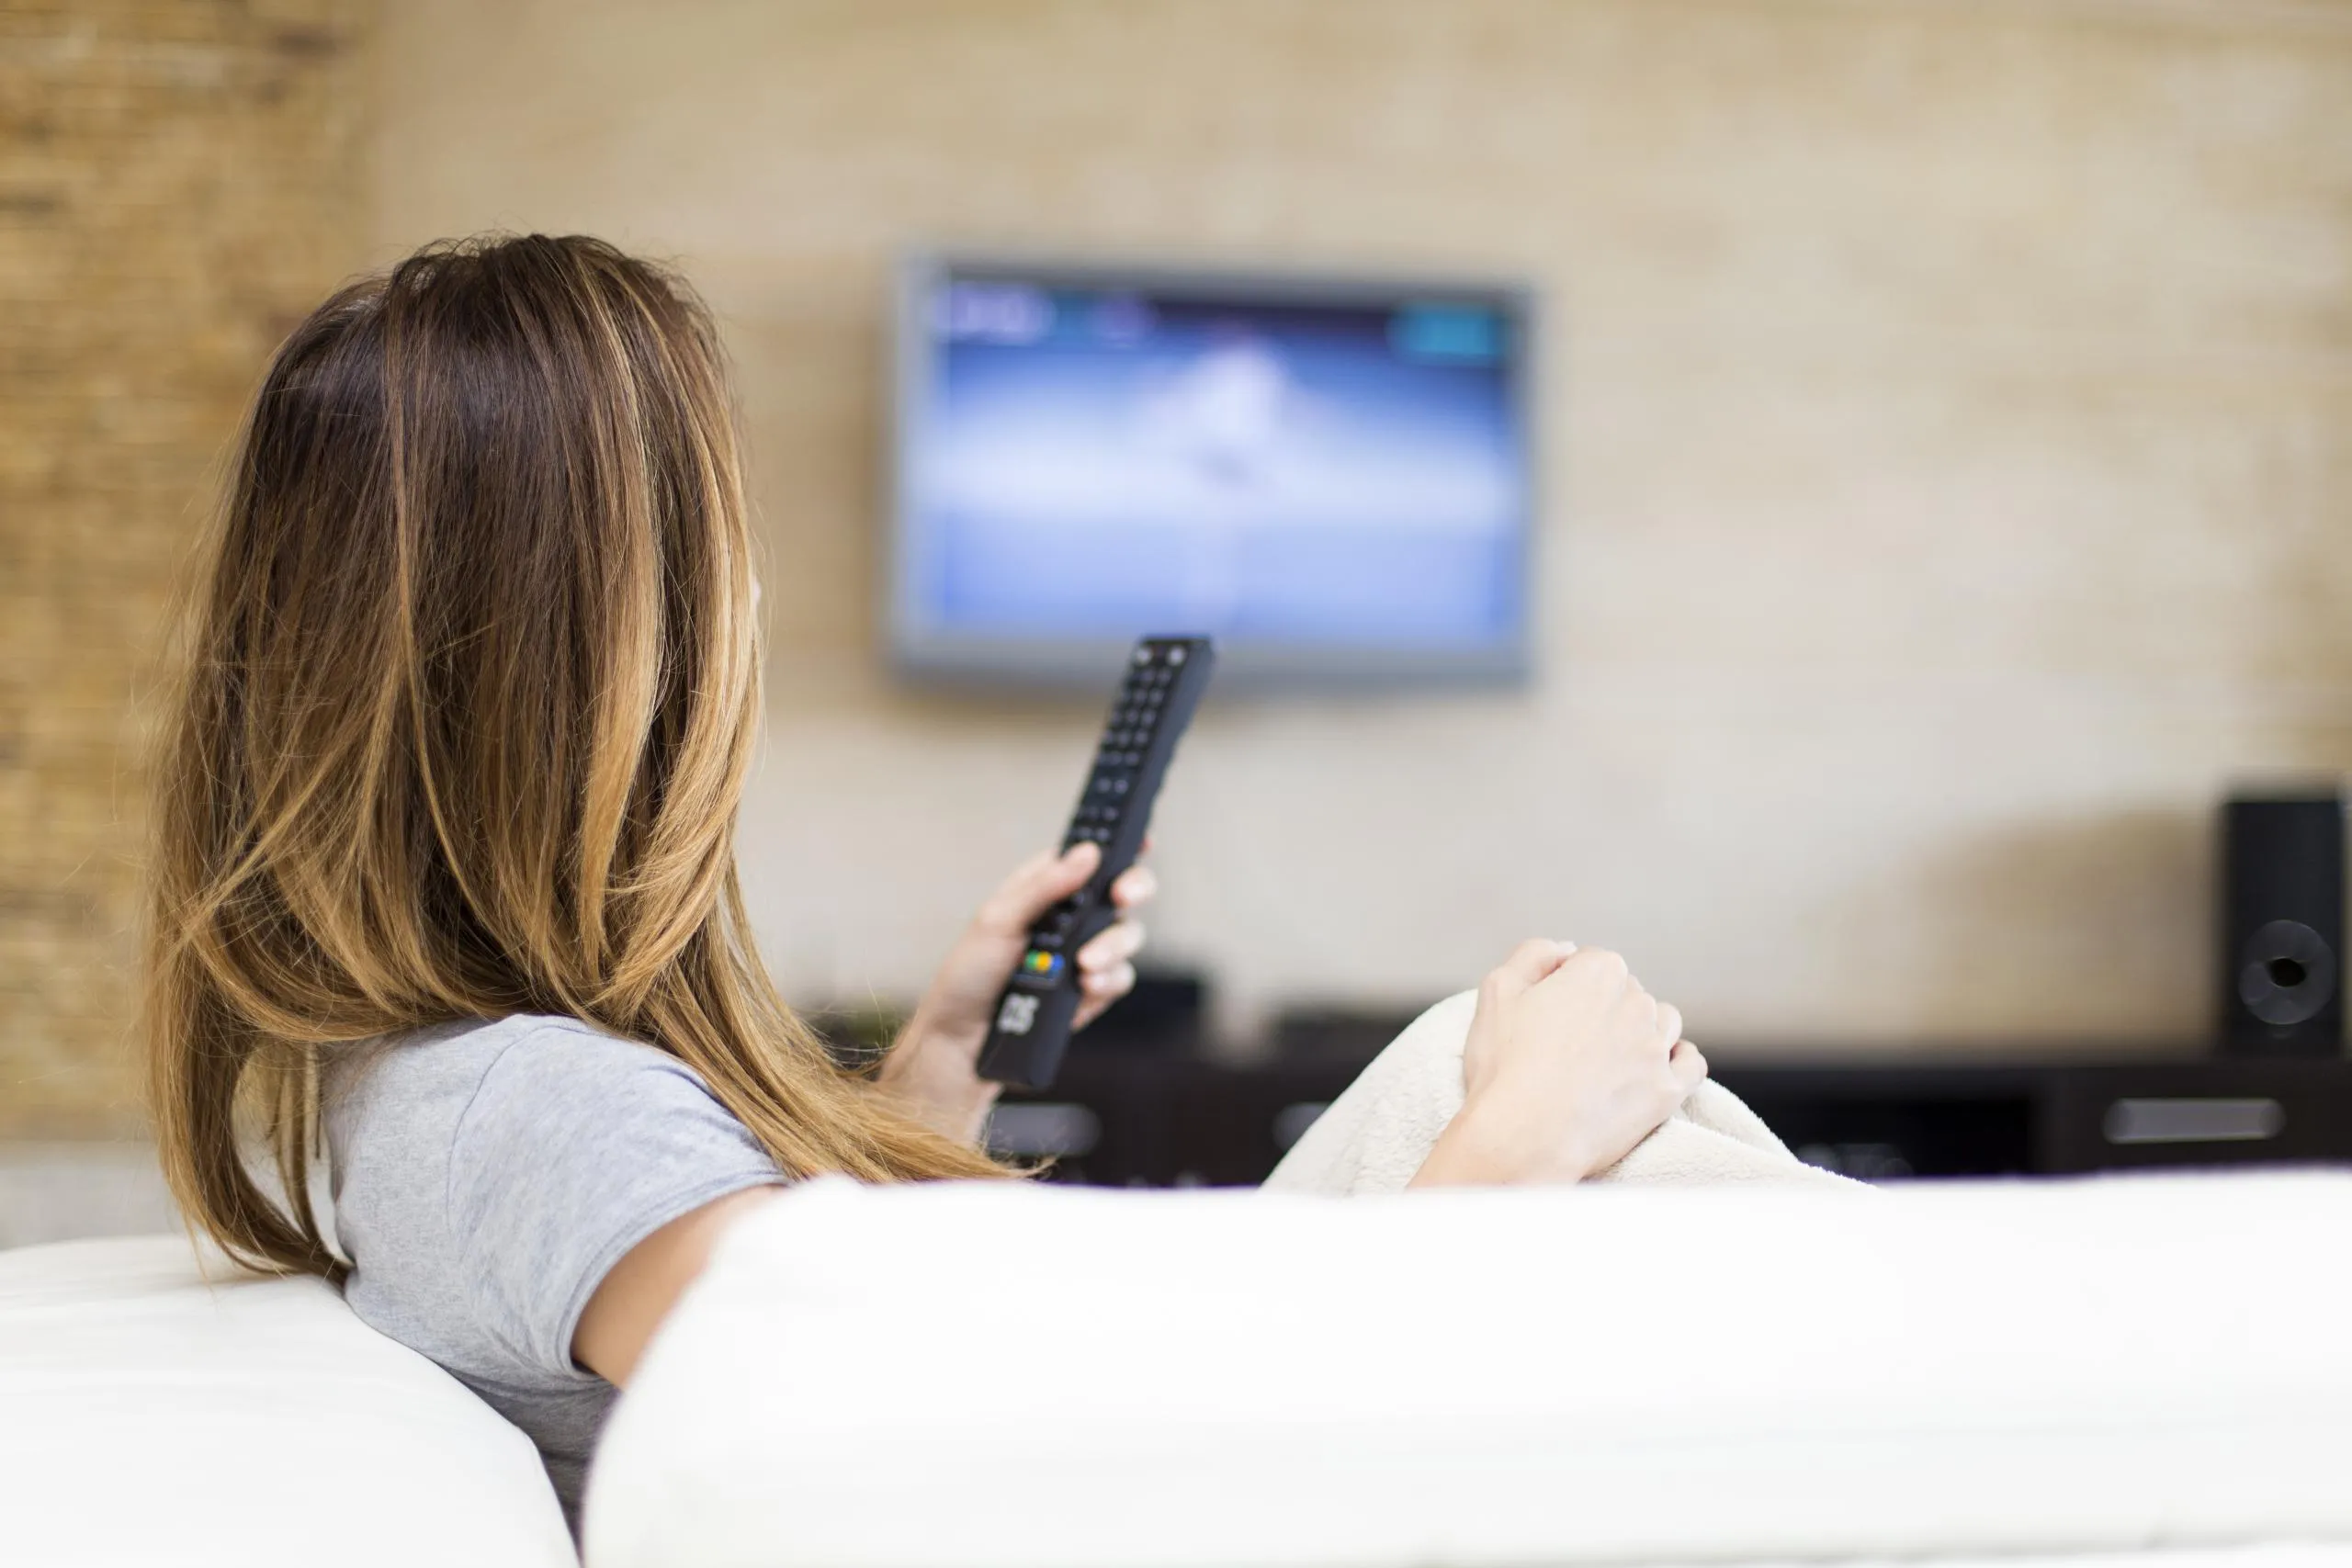 4 Legal Ways People Are Getting Free Cable TV Channels